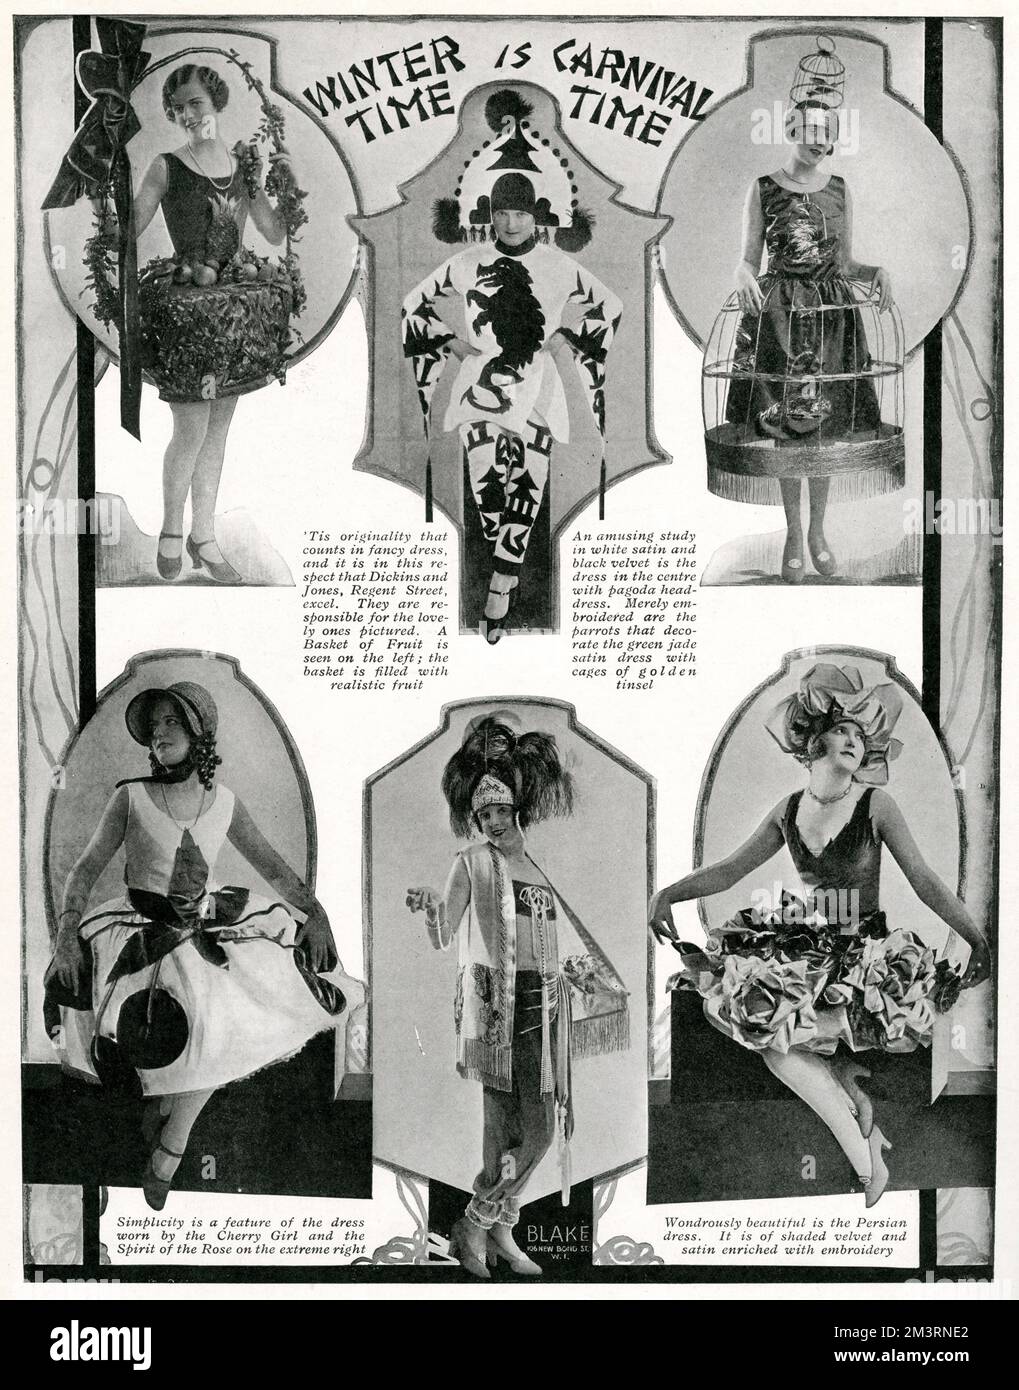 Women's Fashion History Through Newspapers: 1921-1940